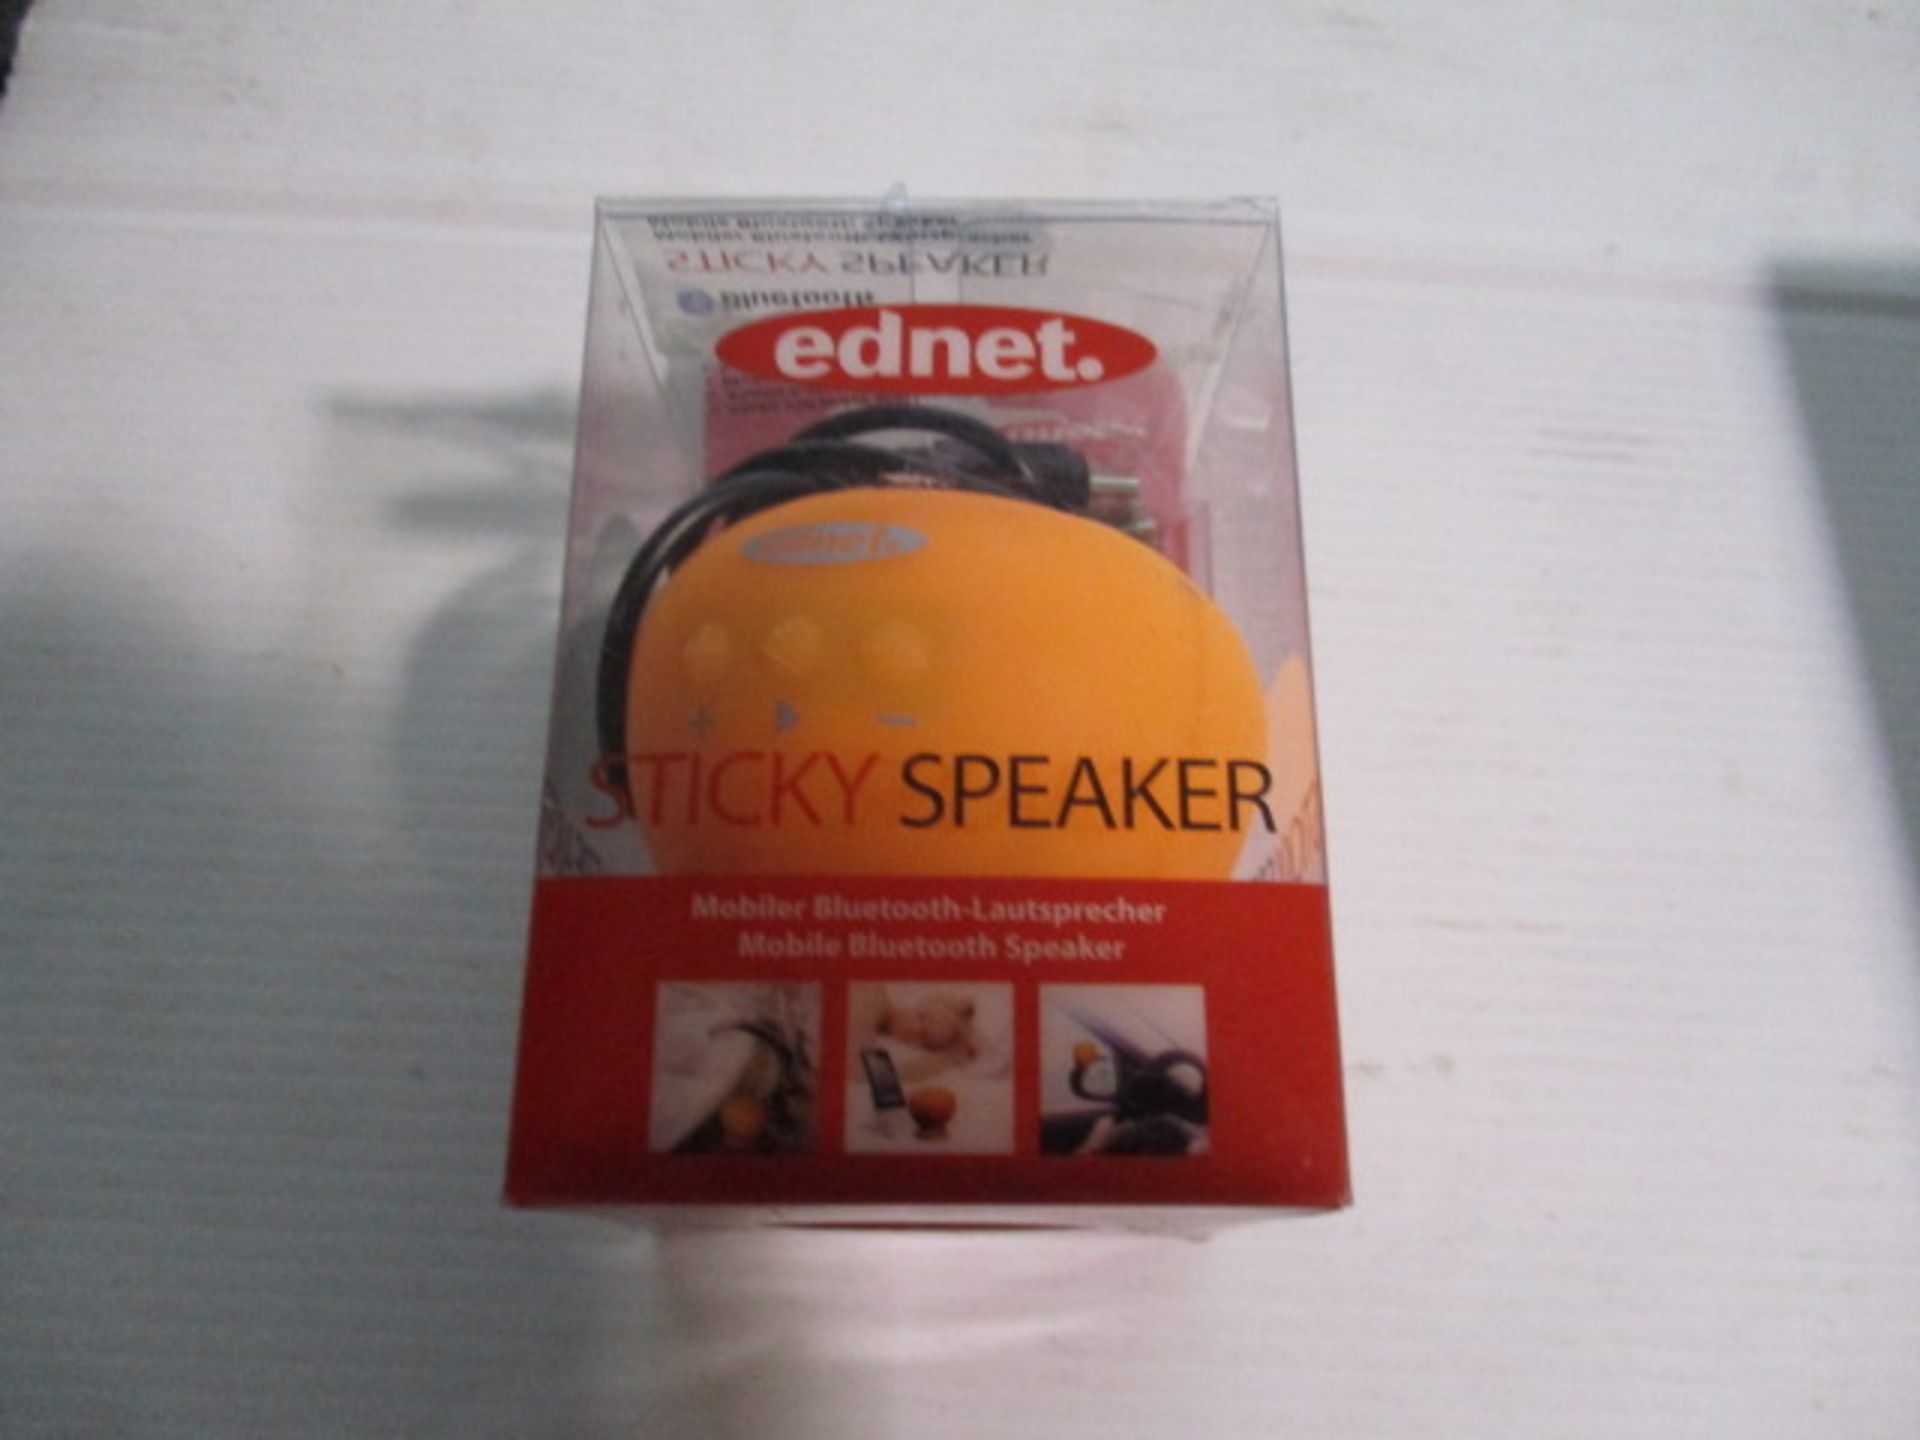 Ednet speaker boxed and unchecked